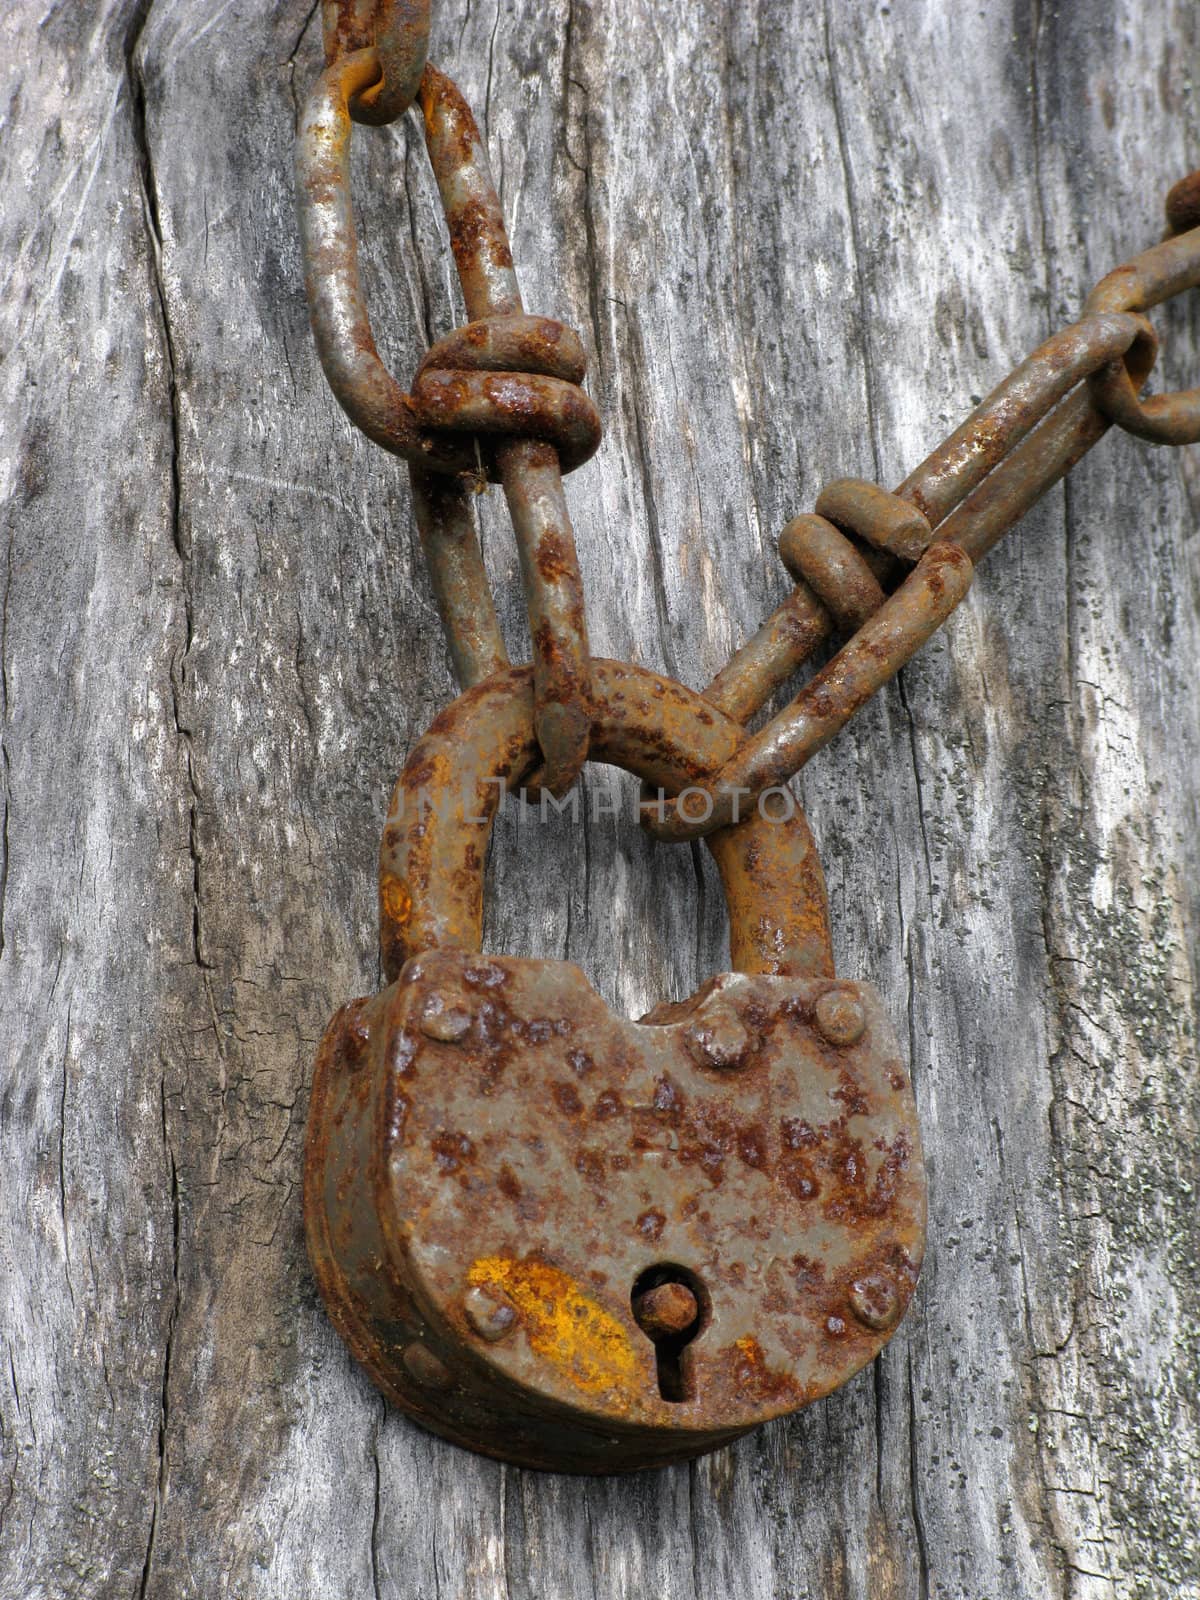 Closeup of an old padlock and rusty chain